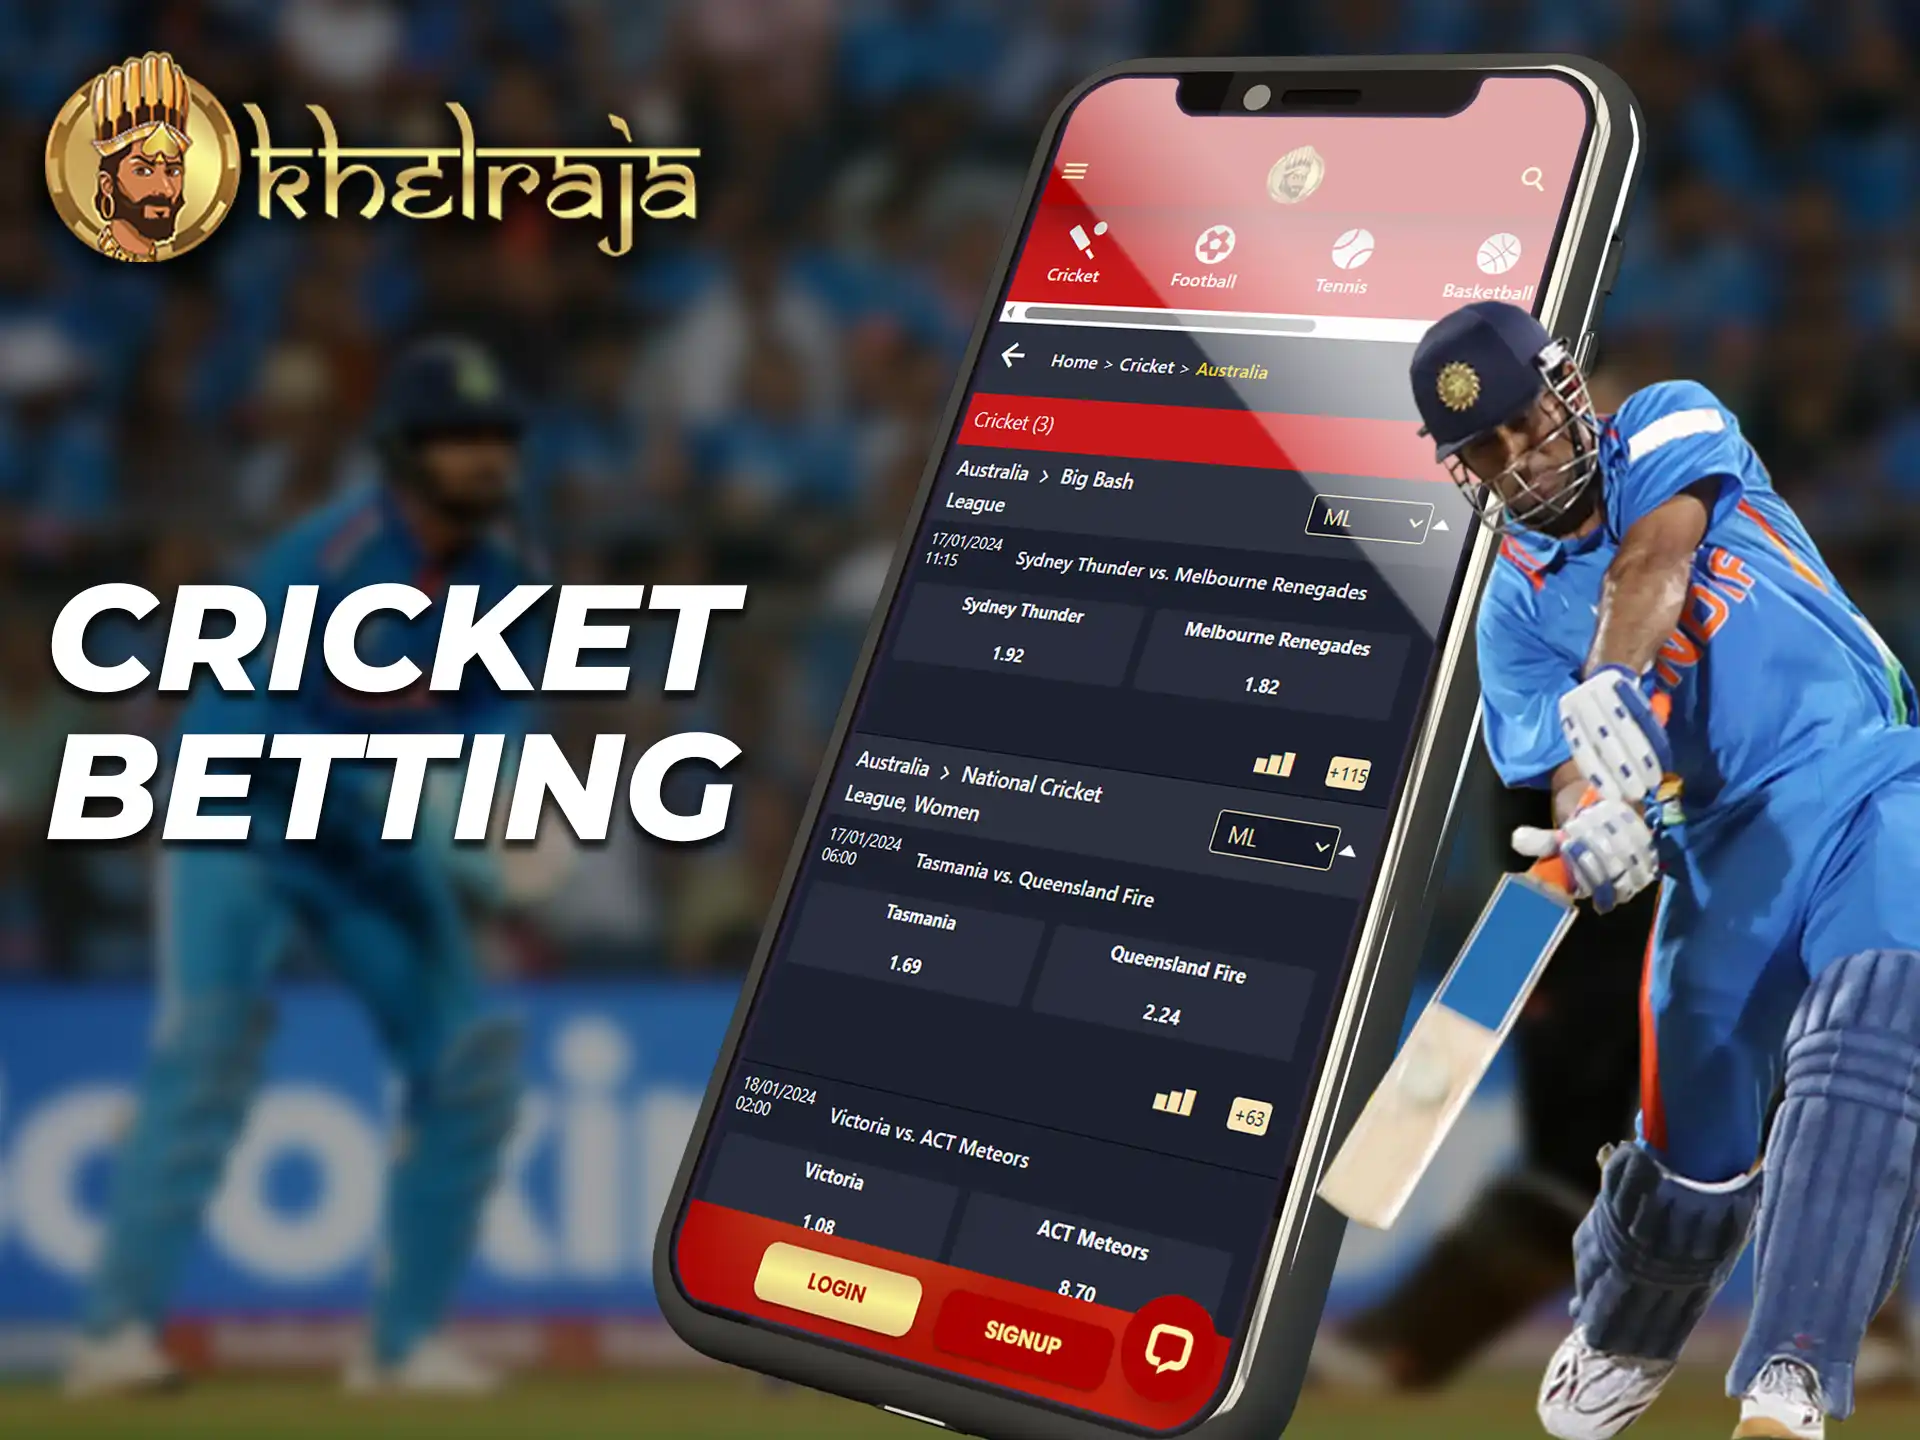 Place your bets on the Khelraja app on India's favorite sport Cricket.